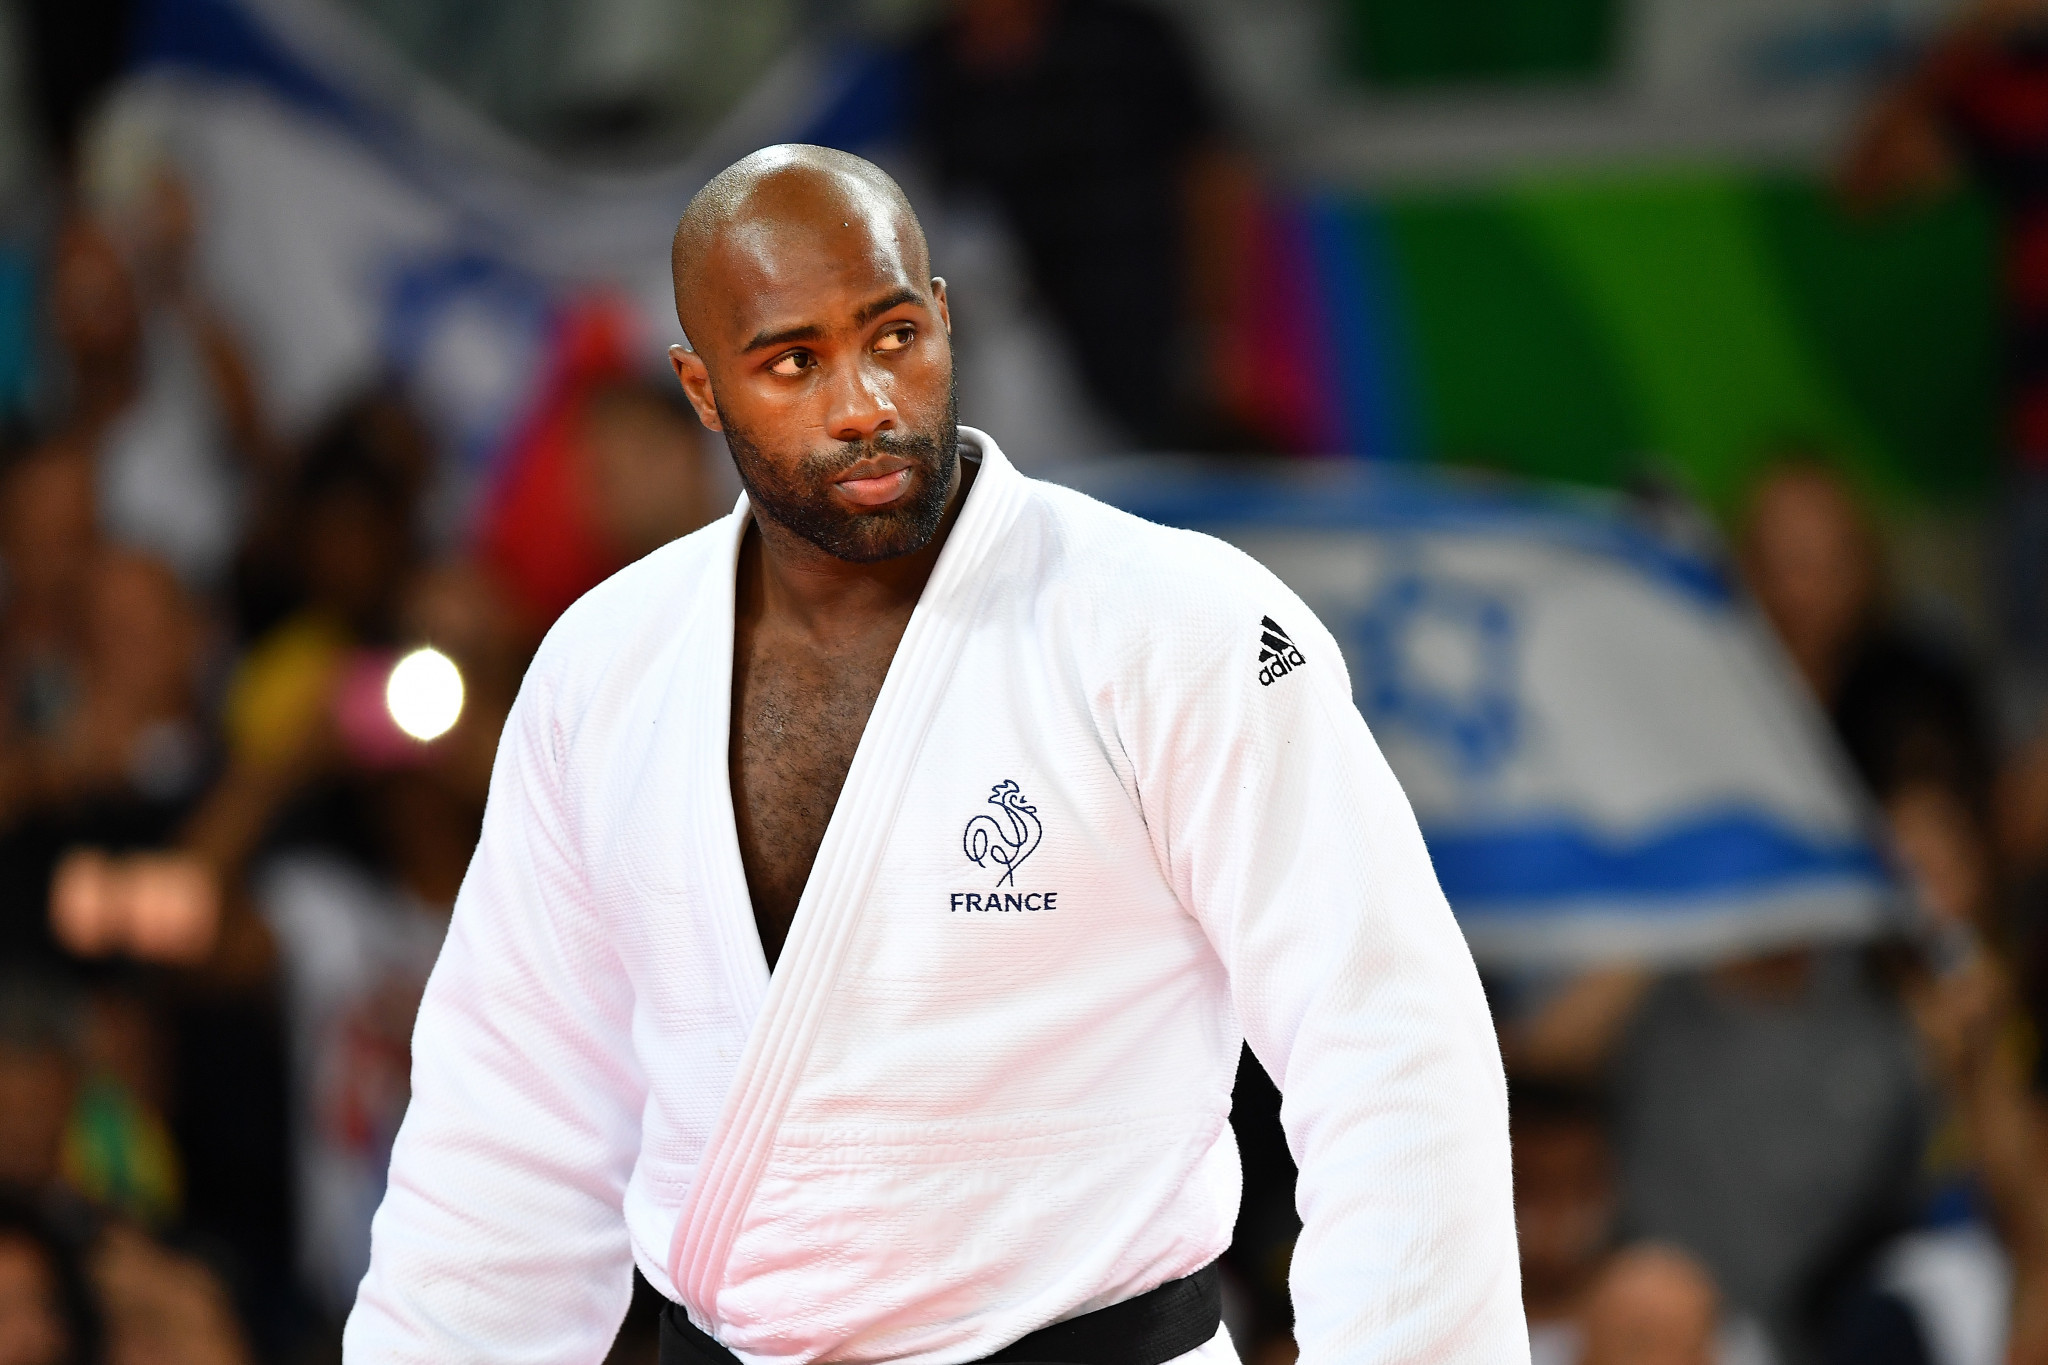 Teddy Riner decided not to compete in the World Judo Championships last October due to an ankle injury he had sustained prior to the event ©Getty Images